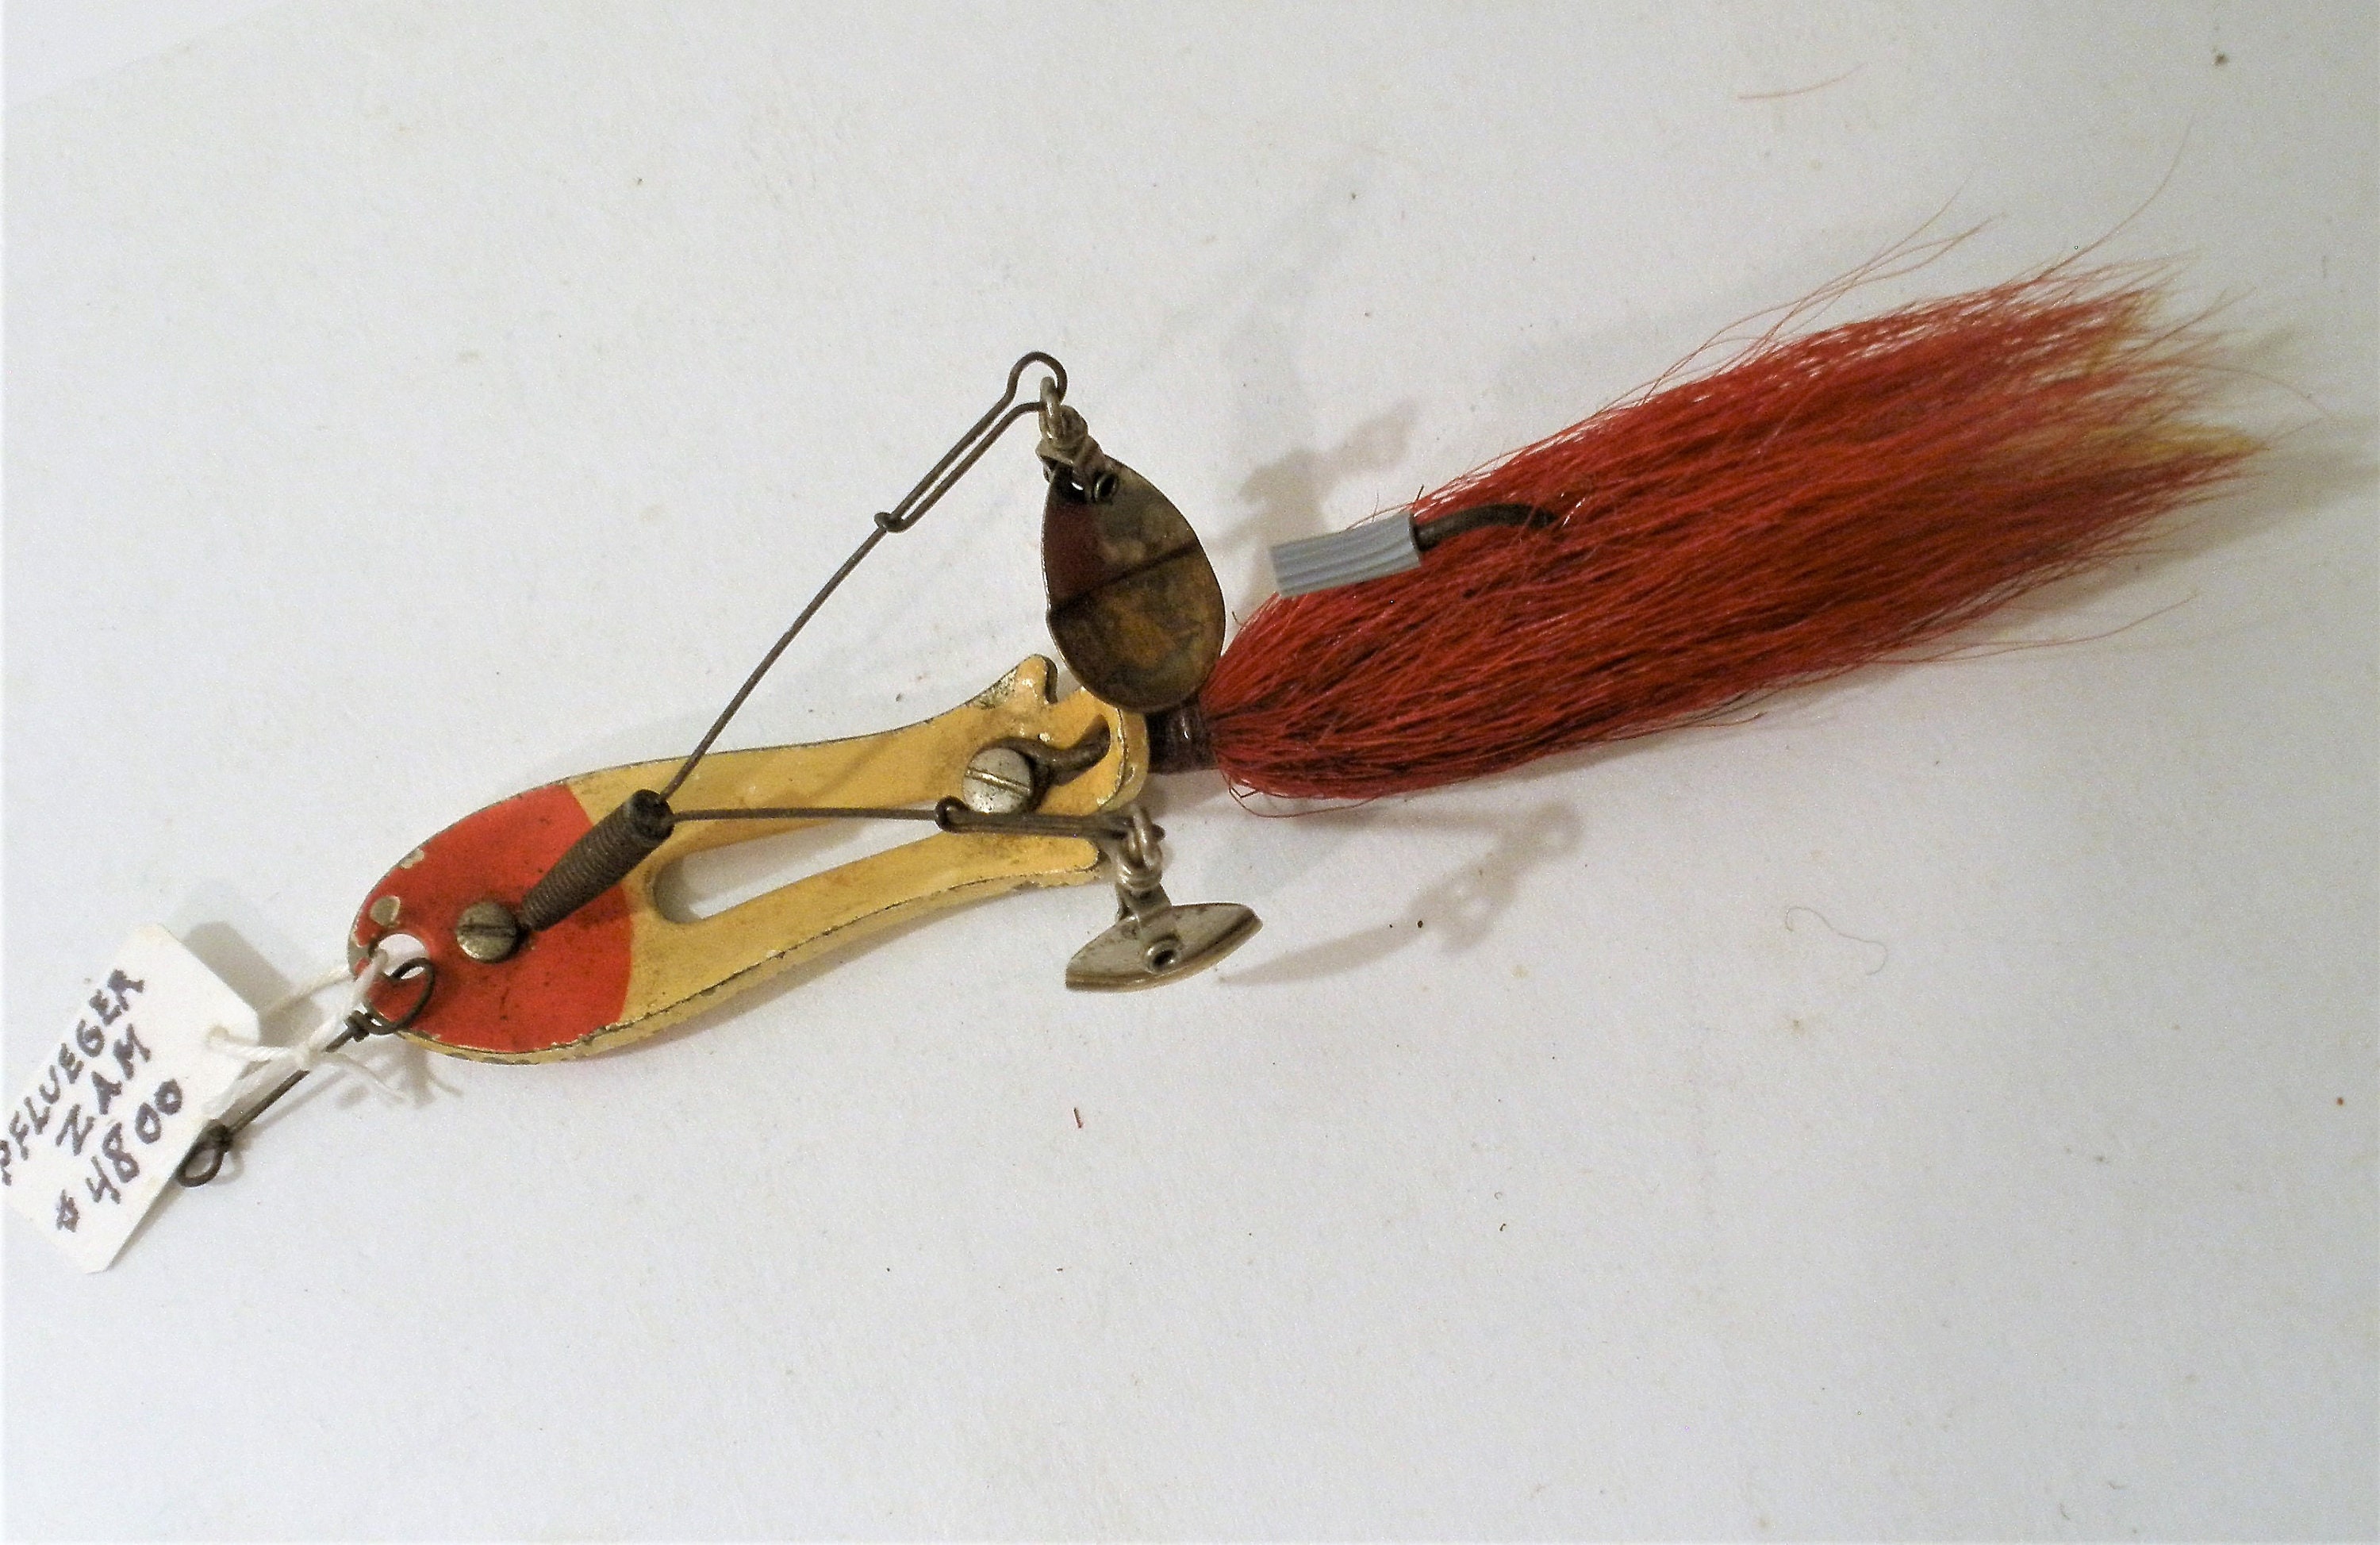 Vintage Pflueger Lure / 4800 Pflueger ZAM Lure / Issued 1941 / All Original  / Nice Metal Lure / Very Collectible / Great Gift Items 